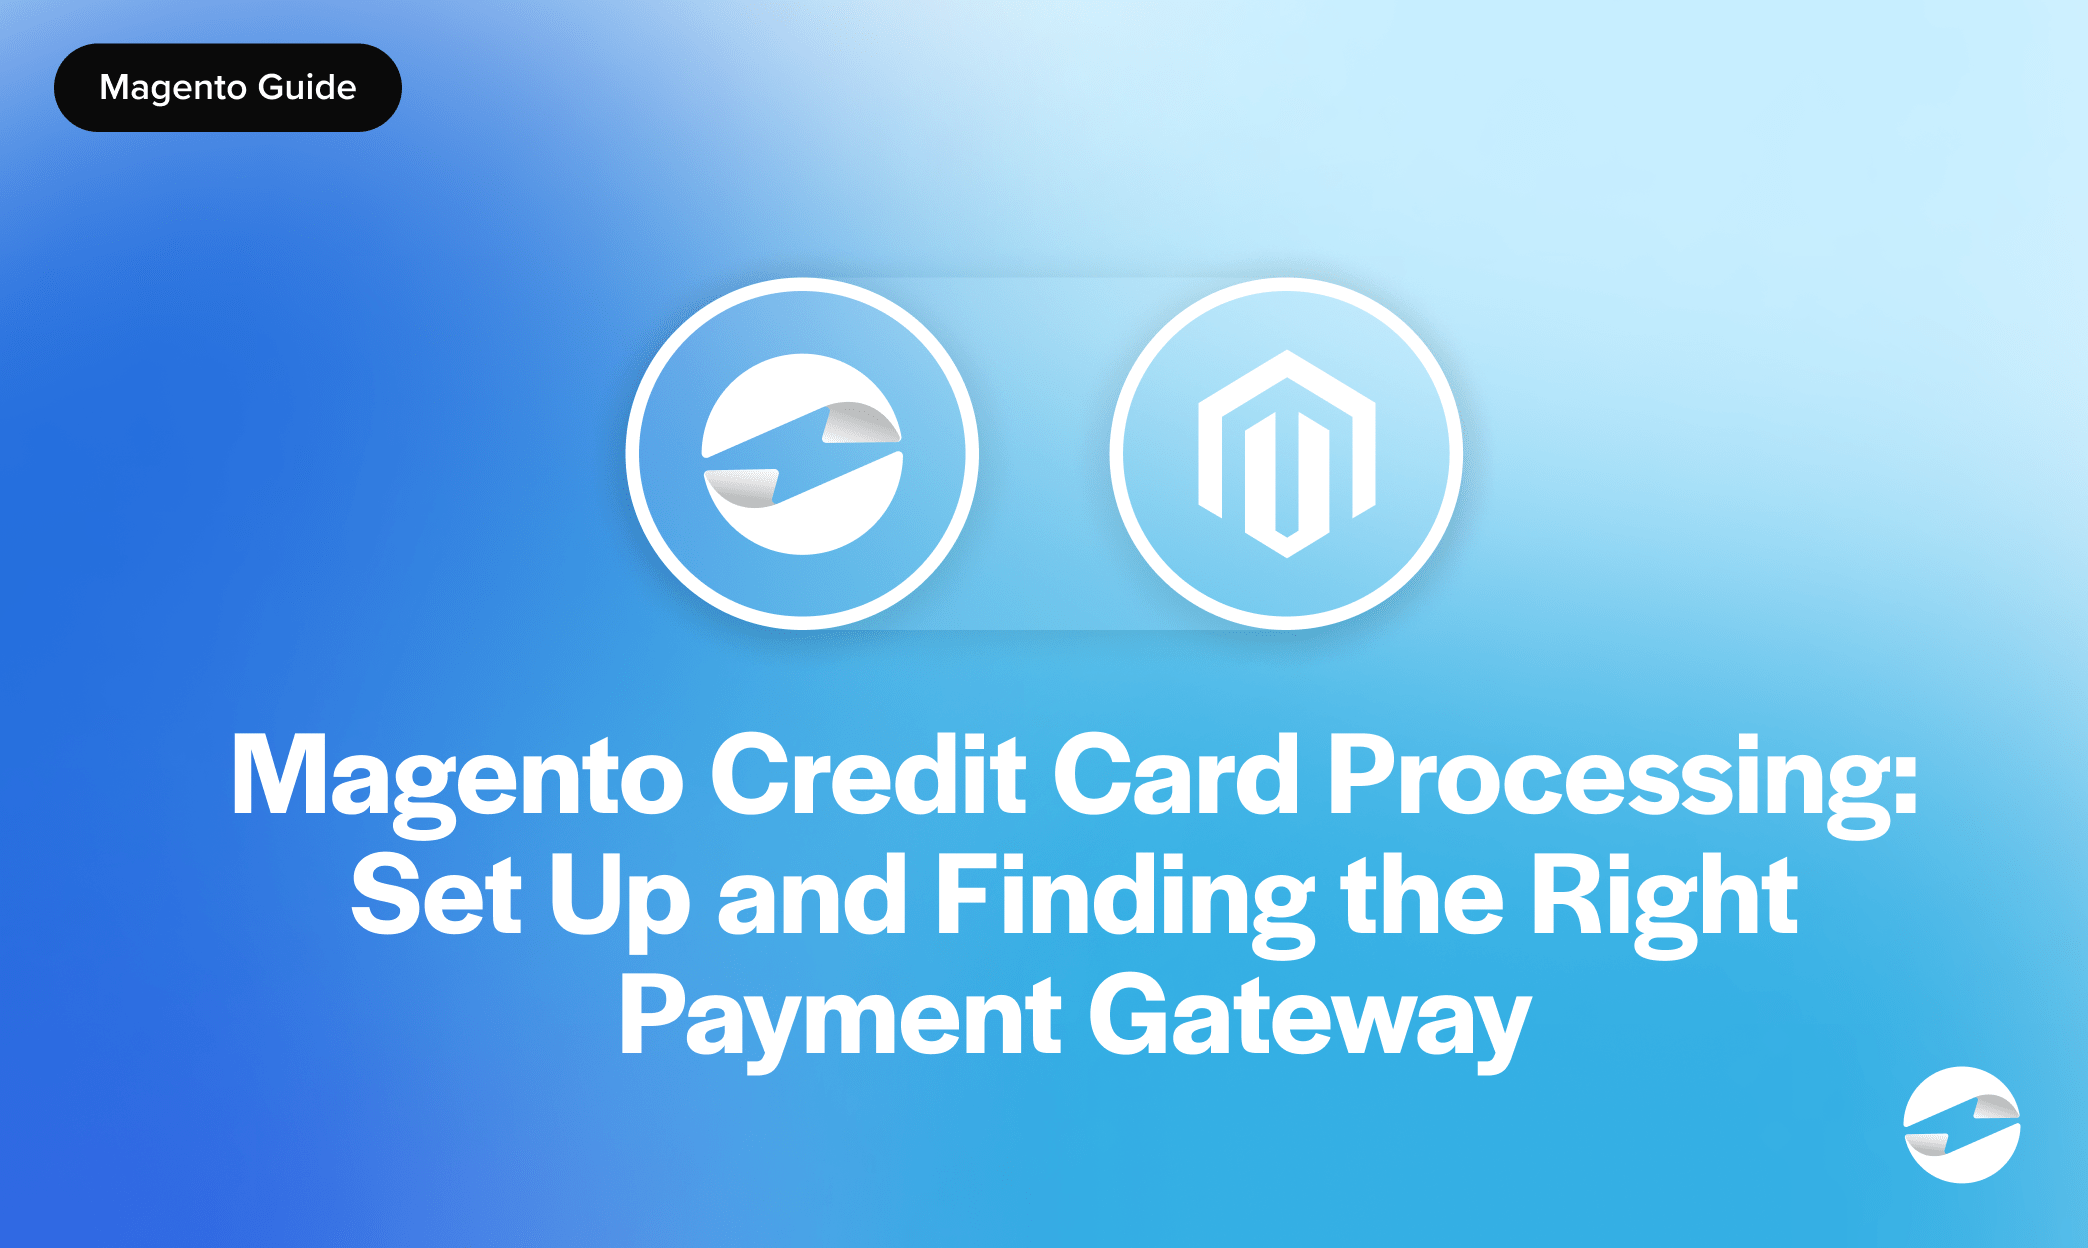 Magento Credit Card Processing: Set Up and Finding the Right Payment Gateway